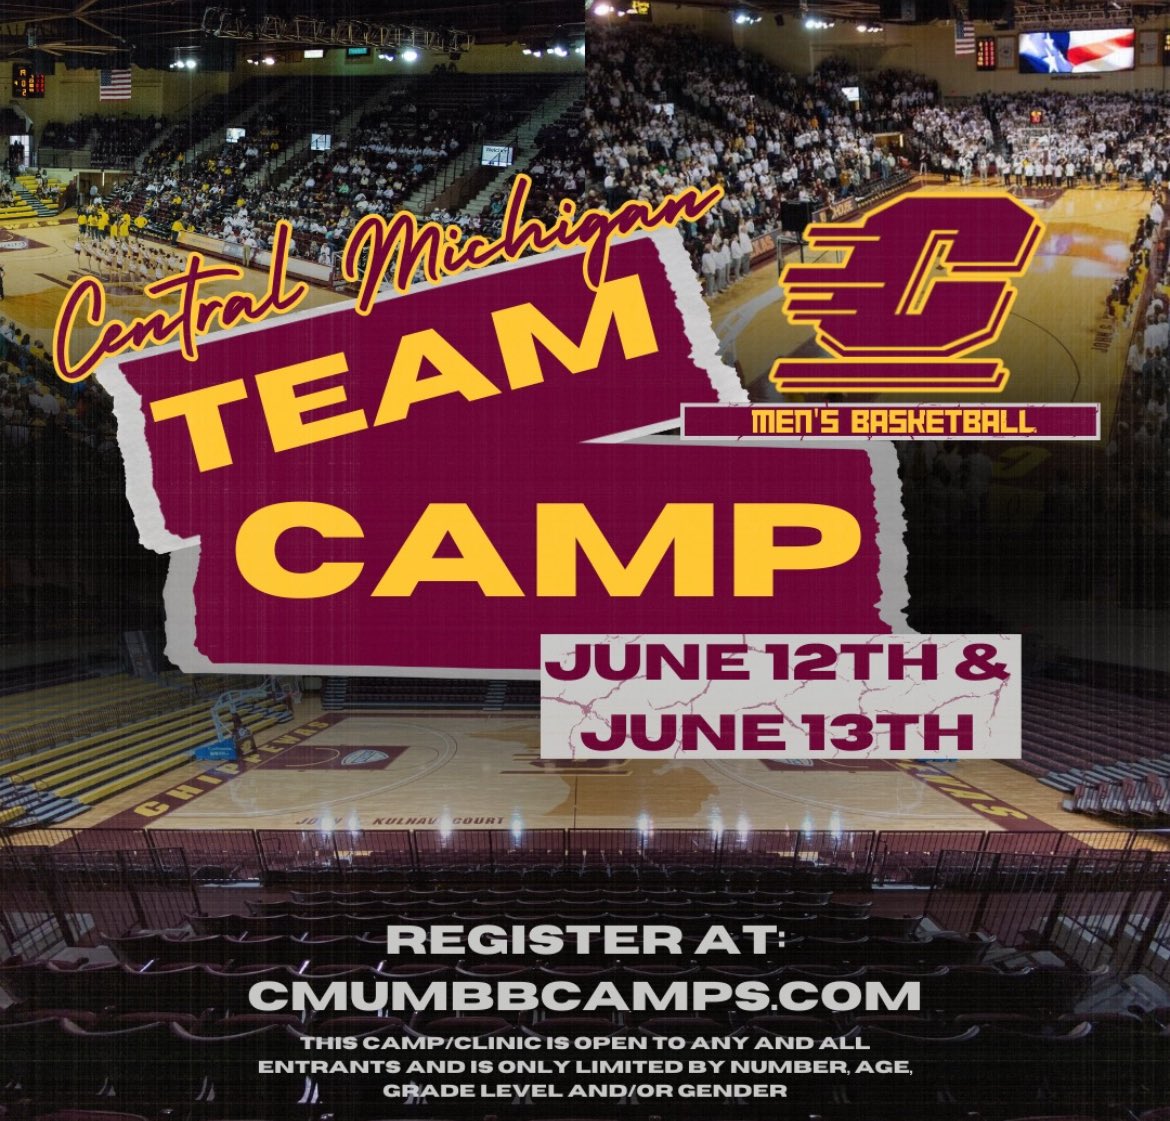 🚨Team Camp is back!🚨 June 12th & 13th We have 1 day and 2 day options. Sign up now while spots are still available! #FireUpChips